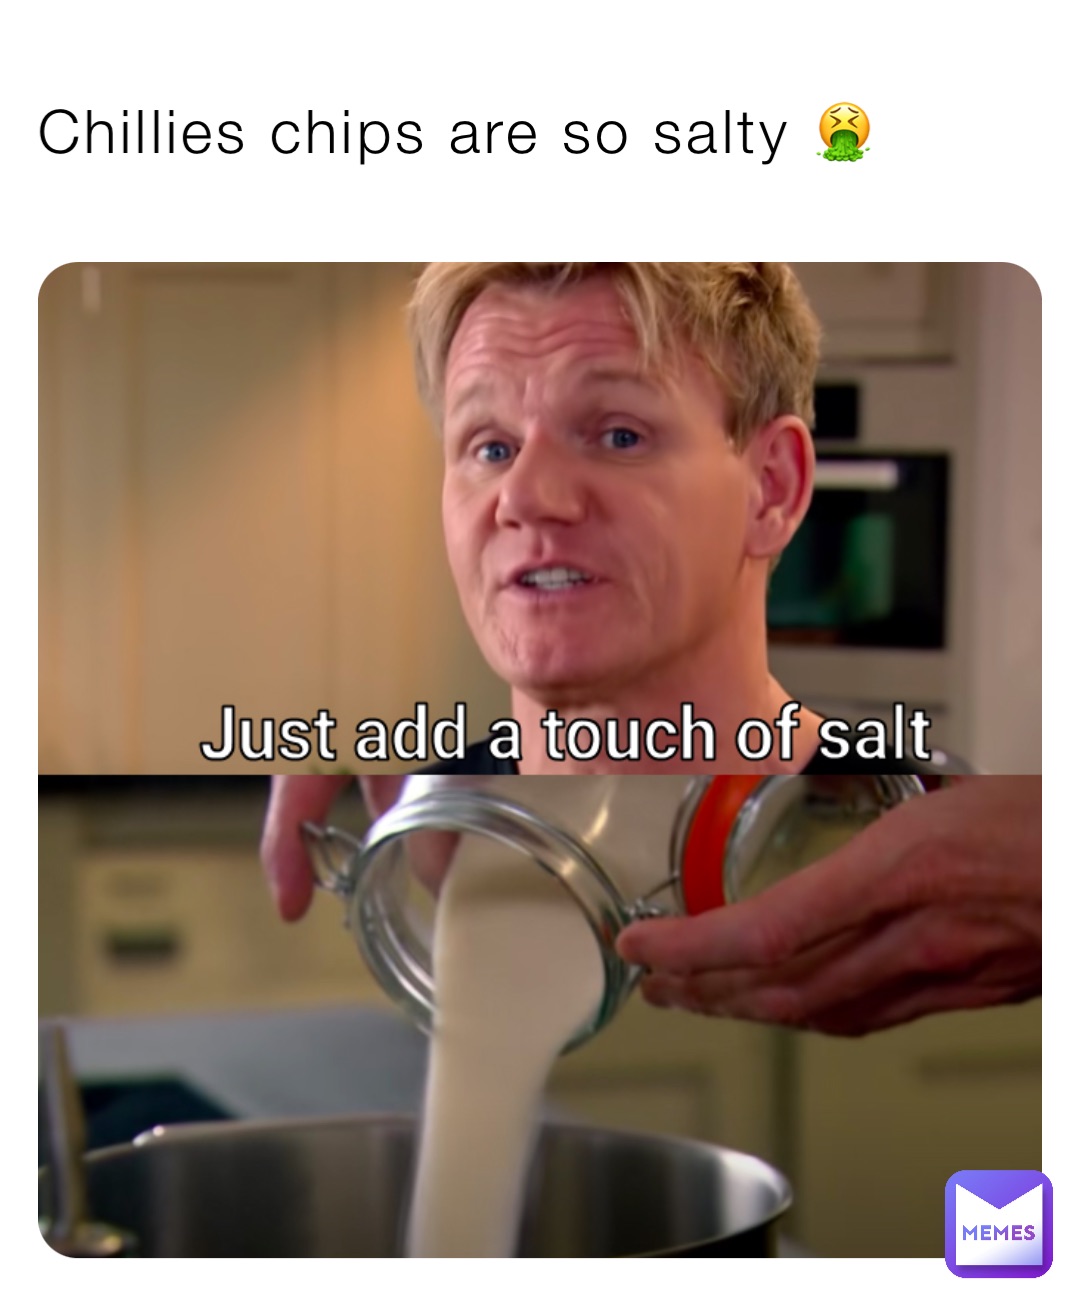 Chillies chips are so salty 🤮